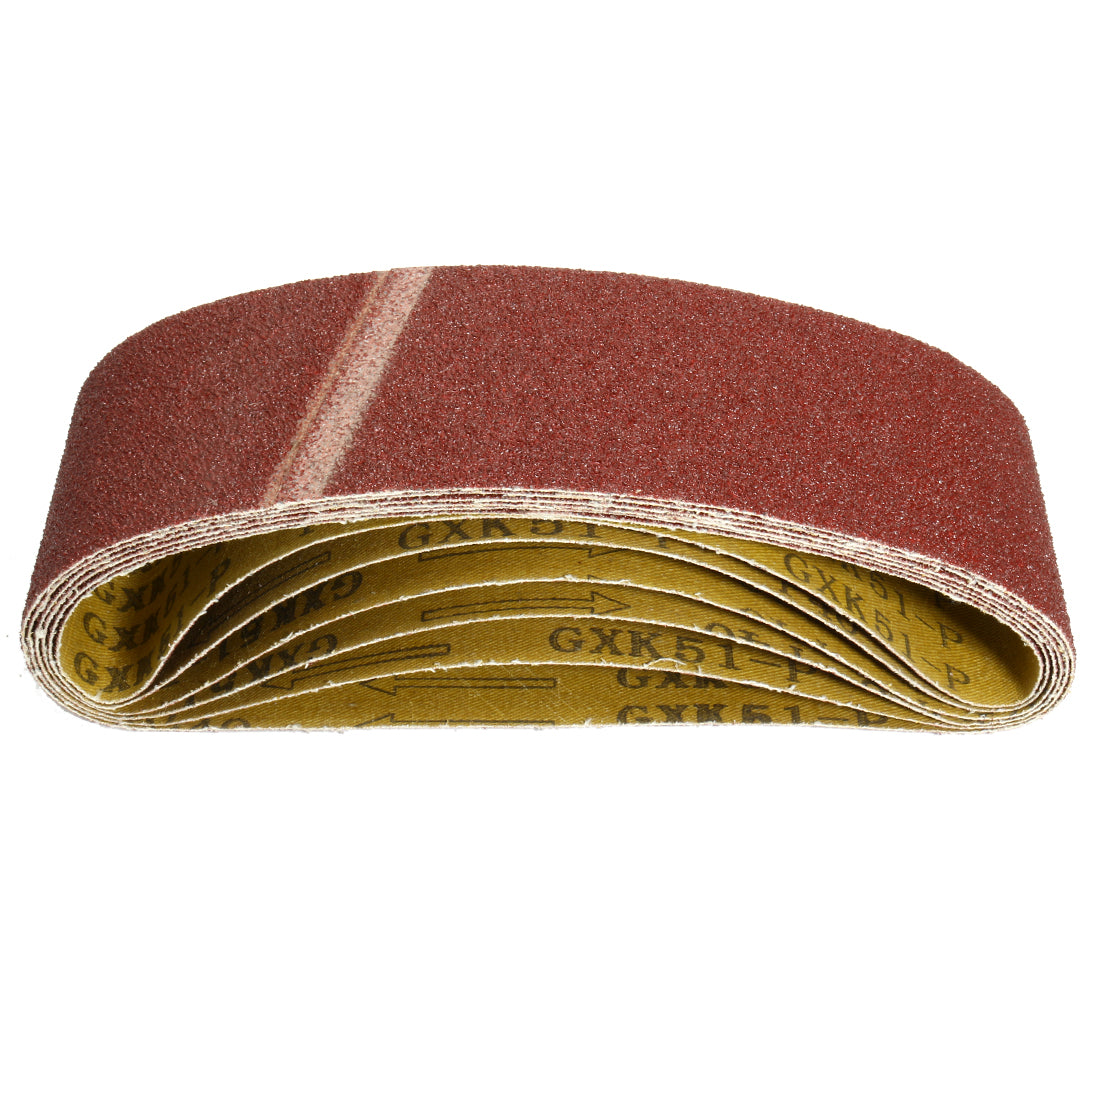 uxcell Uxcell 3-Inch x 21-Inch Aluminum Oxide Sanding Belt 40 Grits Lapped Joint 6pcs